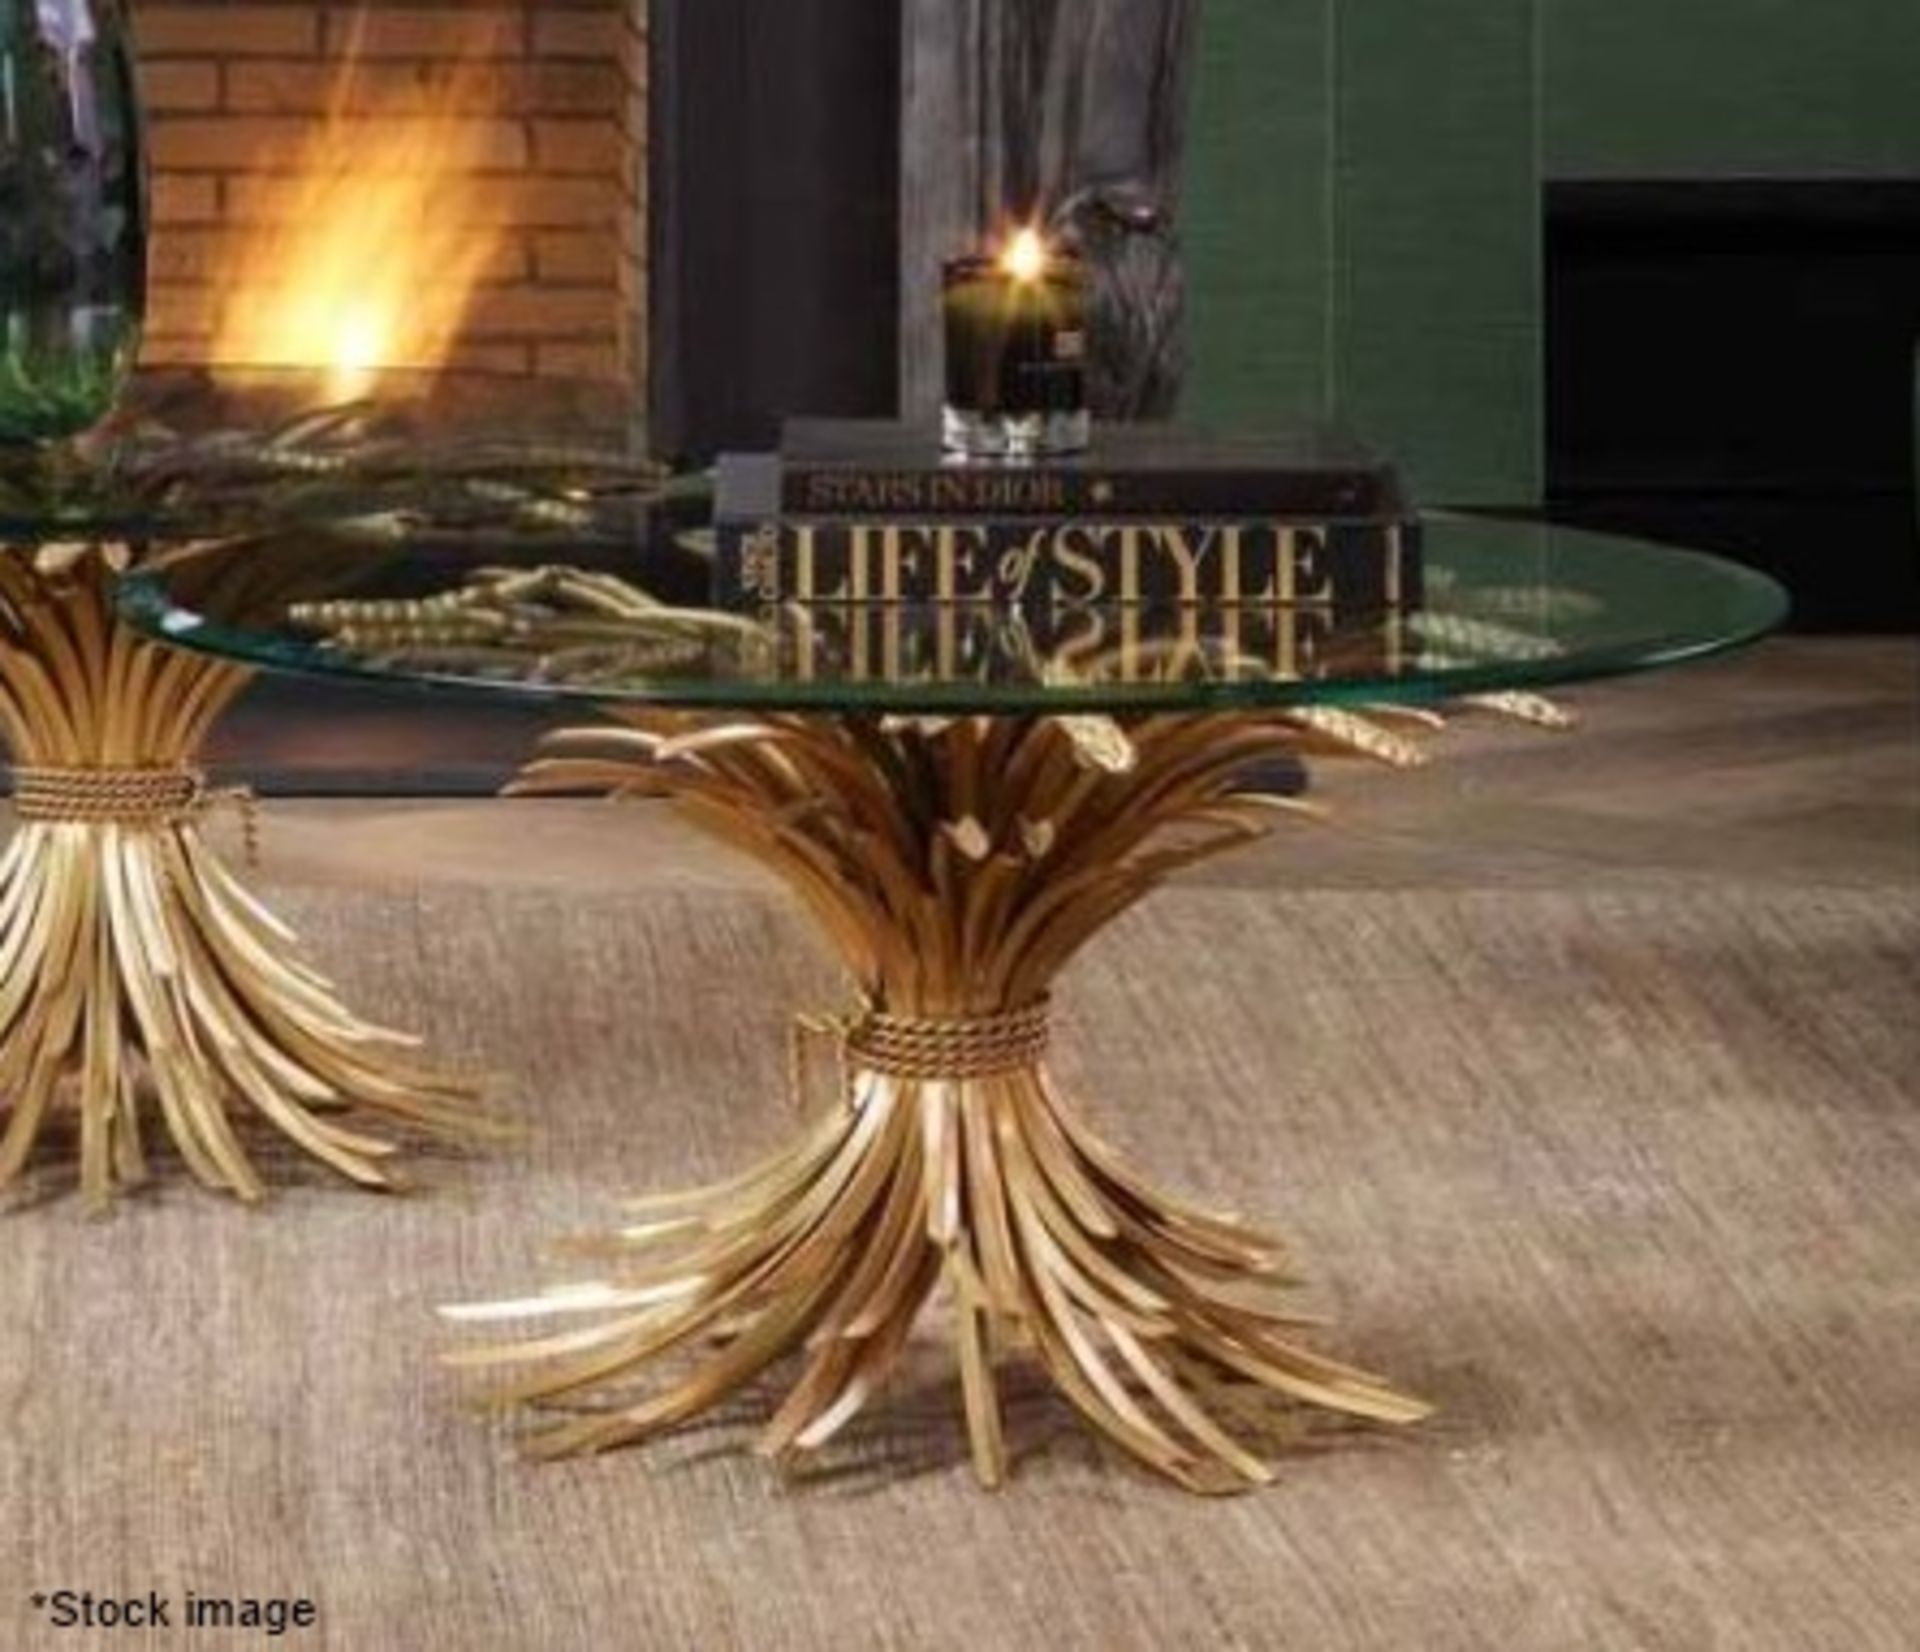 1 x EICHHOLTZ 'Bonheur' 90cm Glass-topped Iron Round Coffee Table With An Antique Gold Finish